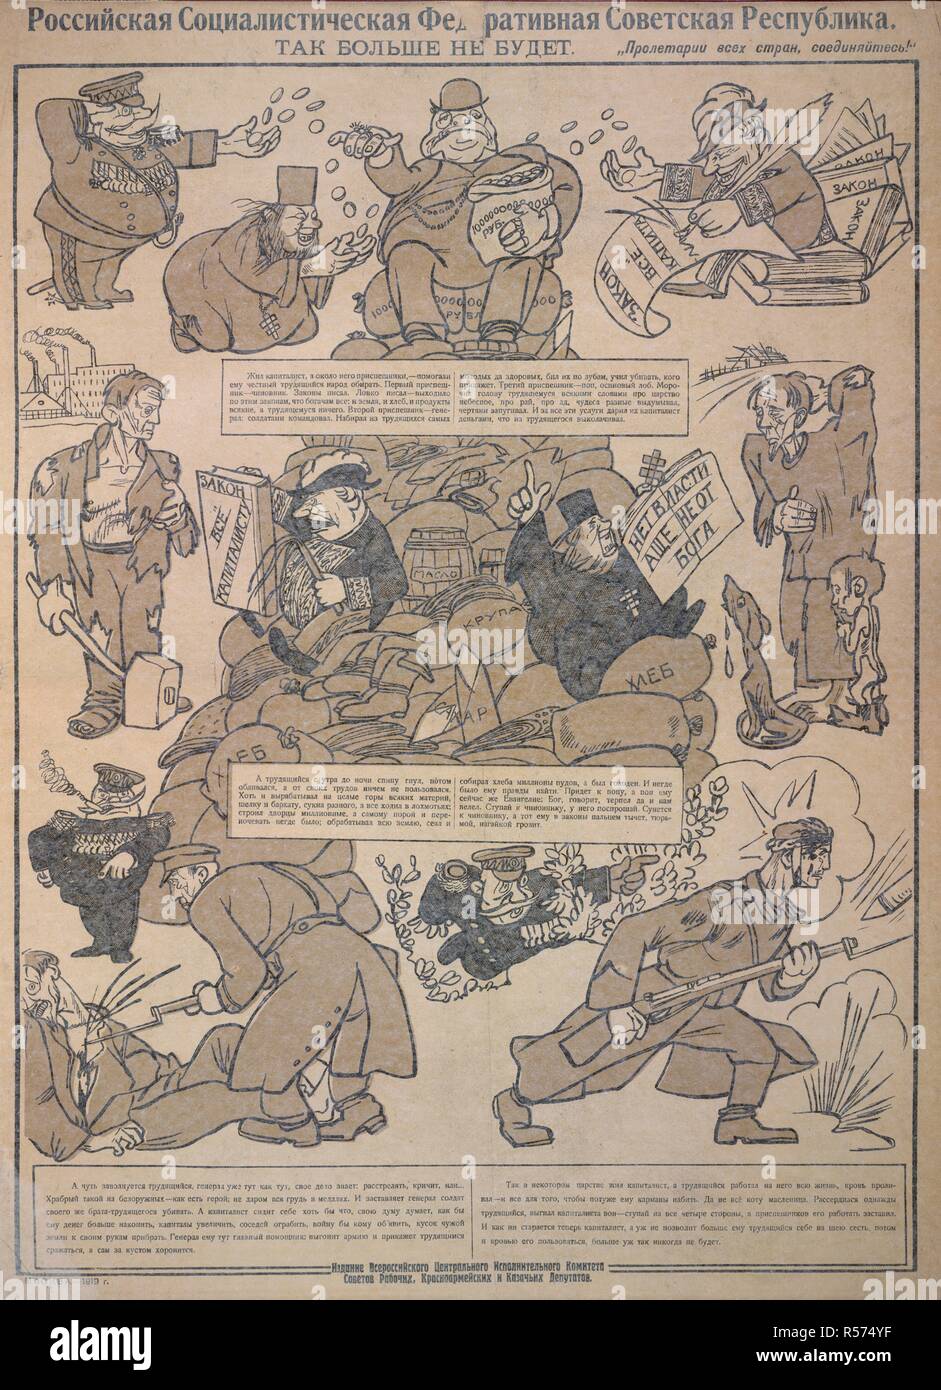 'Tak bol'she ne budet' (It will be like this no more). A wealthy capitalist, priest, general and civil servant, are depicted sitting on sacks of money and food, while downtrodden workers are starving and working, and being forced to fight against their own class brothers. A worker is shown turning against the capitalists and fighting for his own class. A collection of posters issued by the Soviet Soviet government, 1918-1921. Moscow: VTSIK, 1919. Two coloured lithograph. Source: Cup.645.a.6.(4). Language: Russian. Author: ANON. Stock Photo